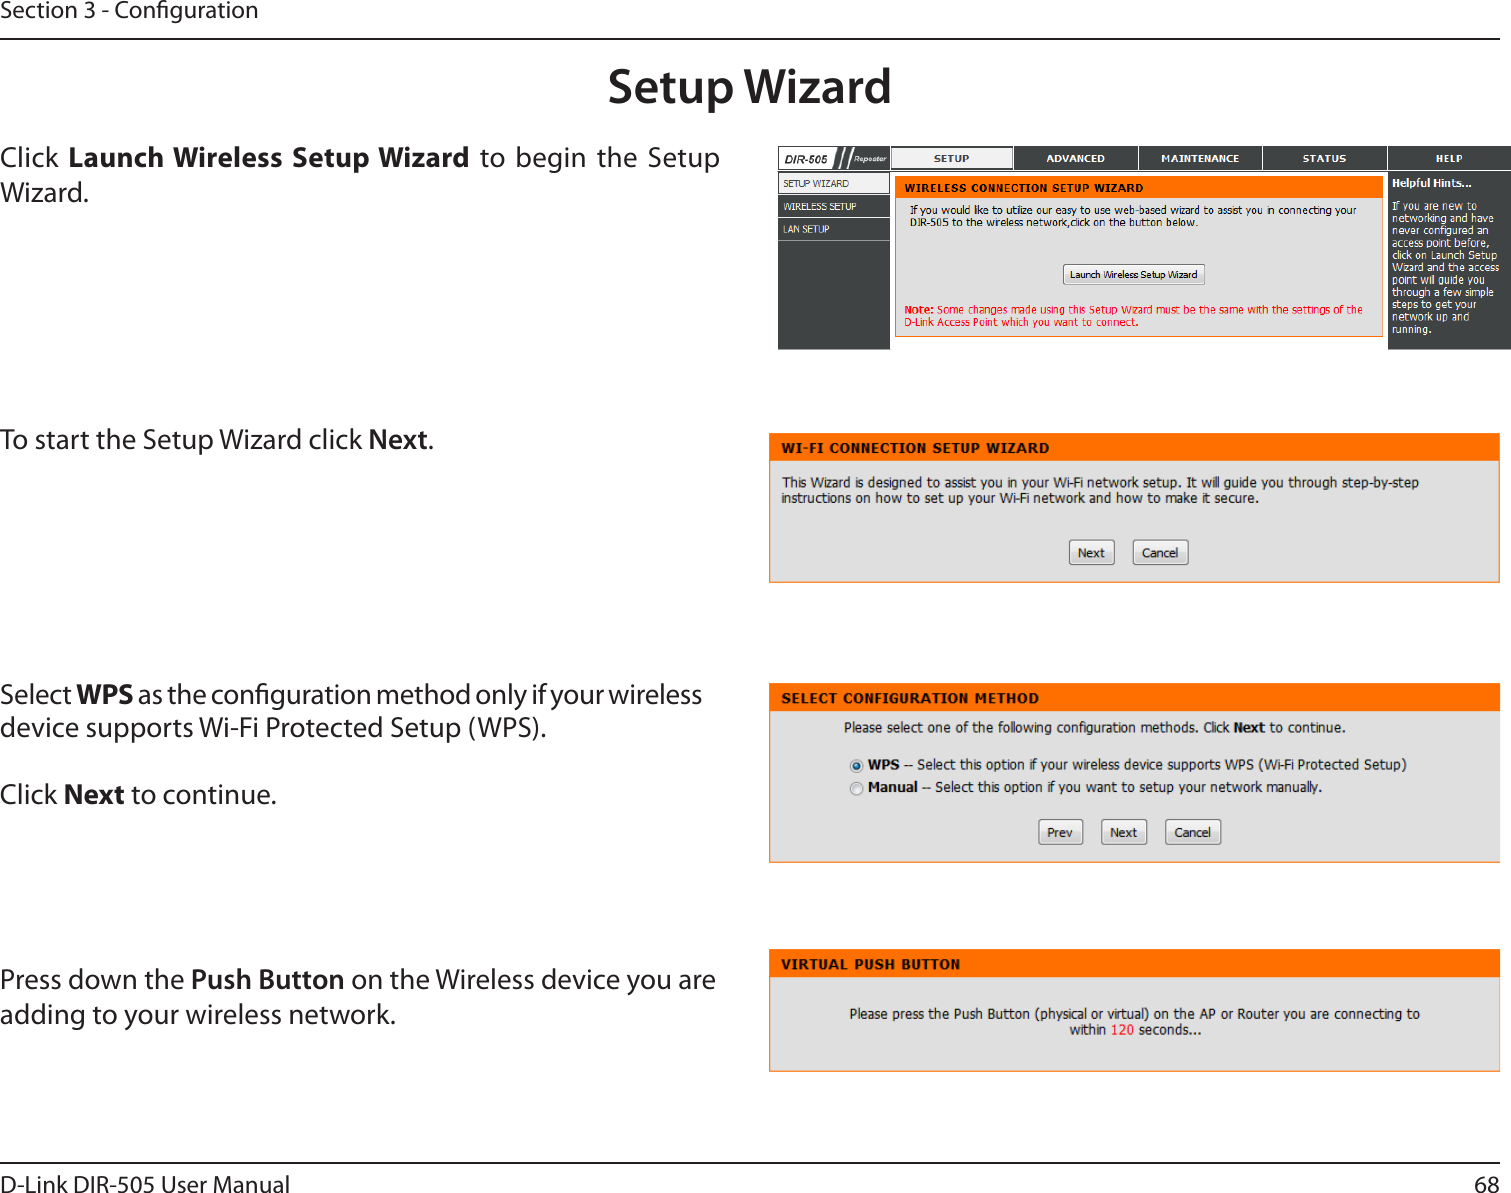 68D-Link DIR-505 User ManualSection 3 - CongurationSetup WizardClick Launch Wireless Setup Wizard to begin the Setup Wizard.To start the Setup Wizard click Next.Select WPS as the conguration method only if your wireless device supports Wi-Fi Protected Setup (WPS). Click Next to continue.Press down the Push Button on the Wireless device you are adding to your wireless network. 